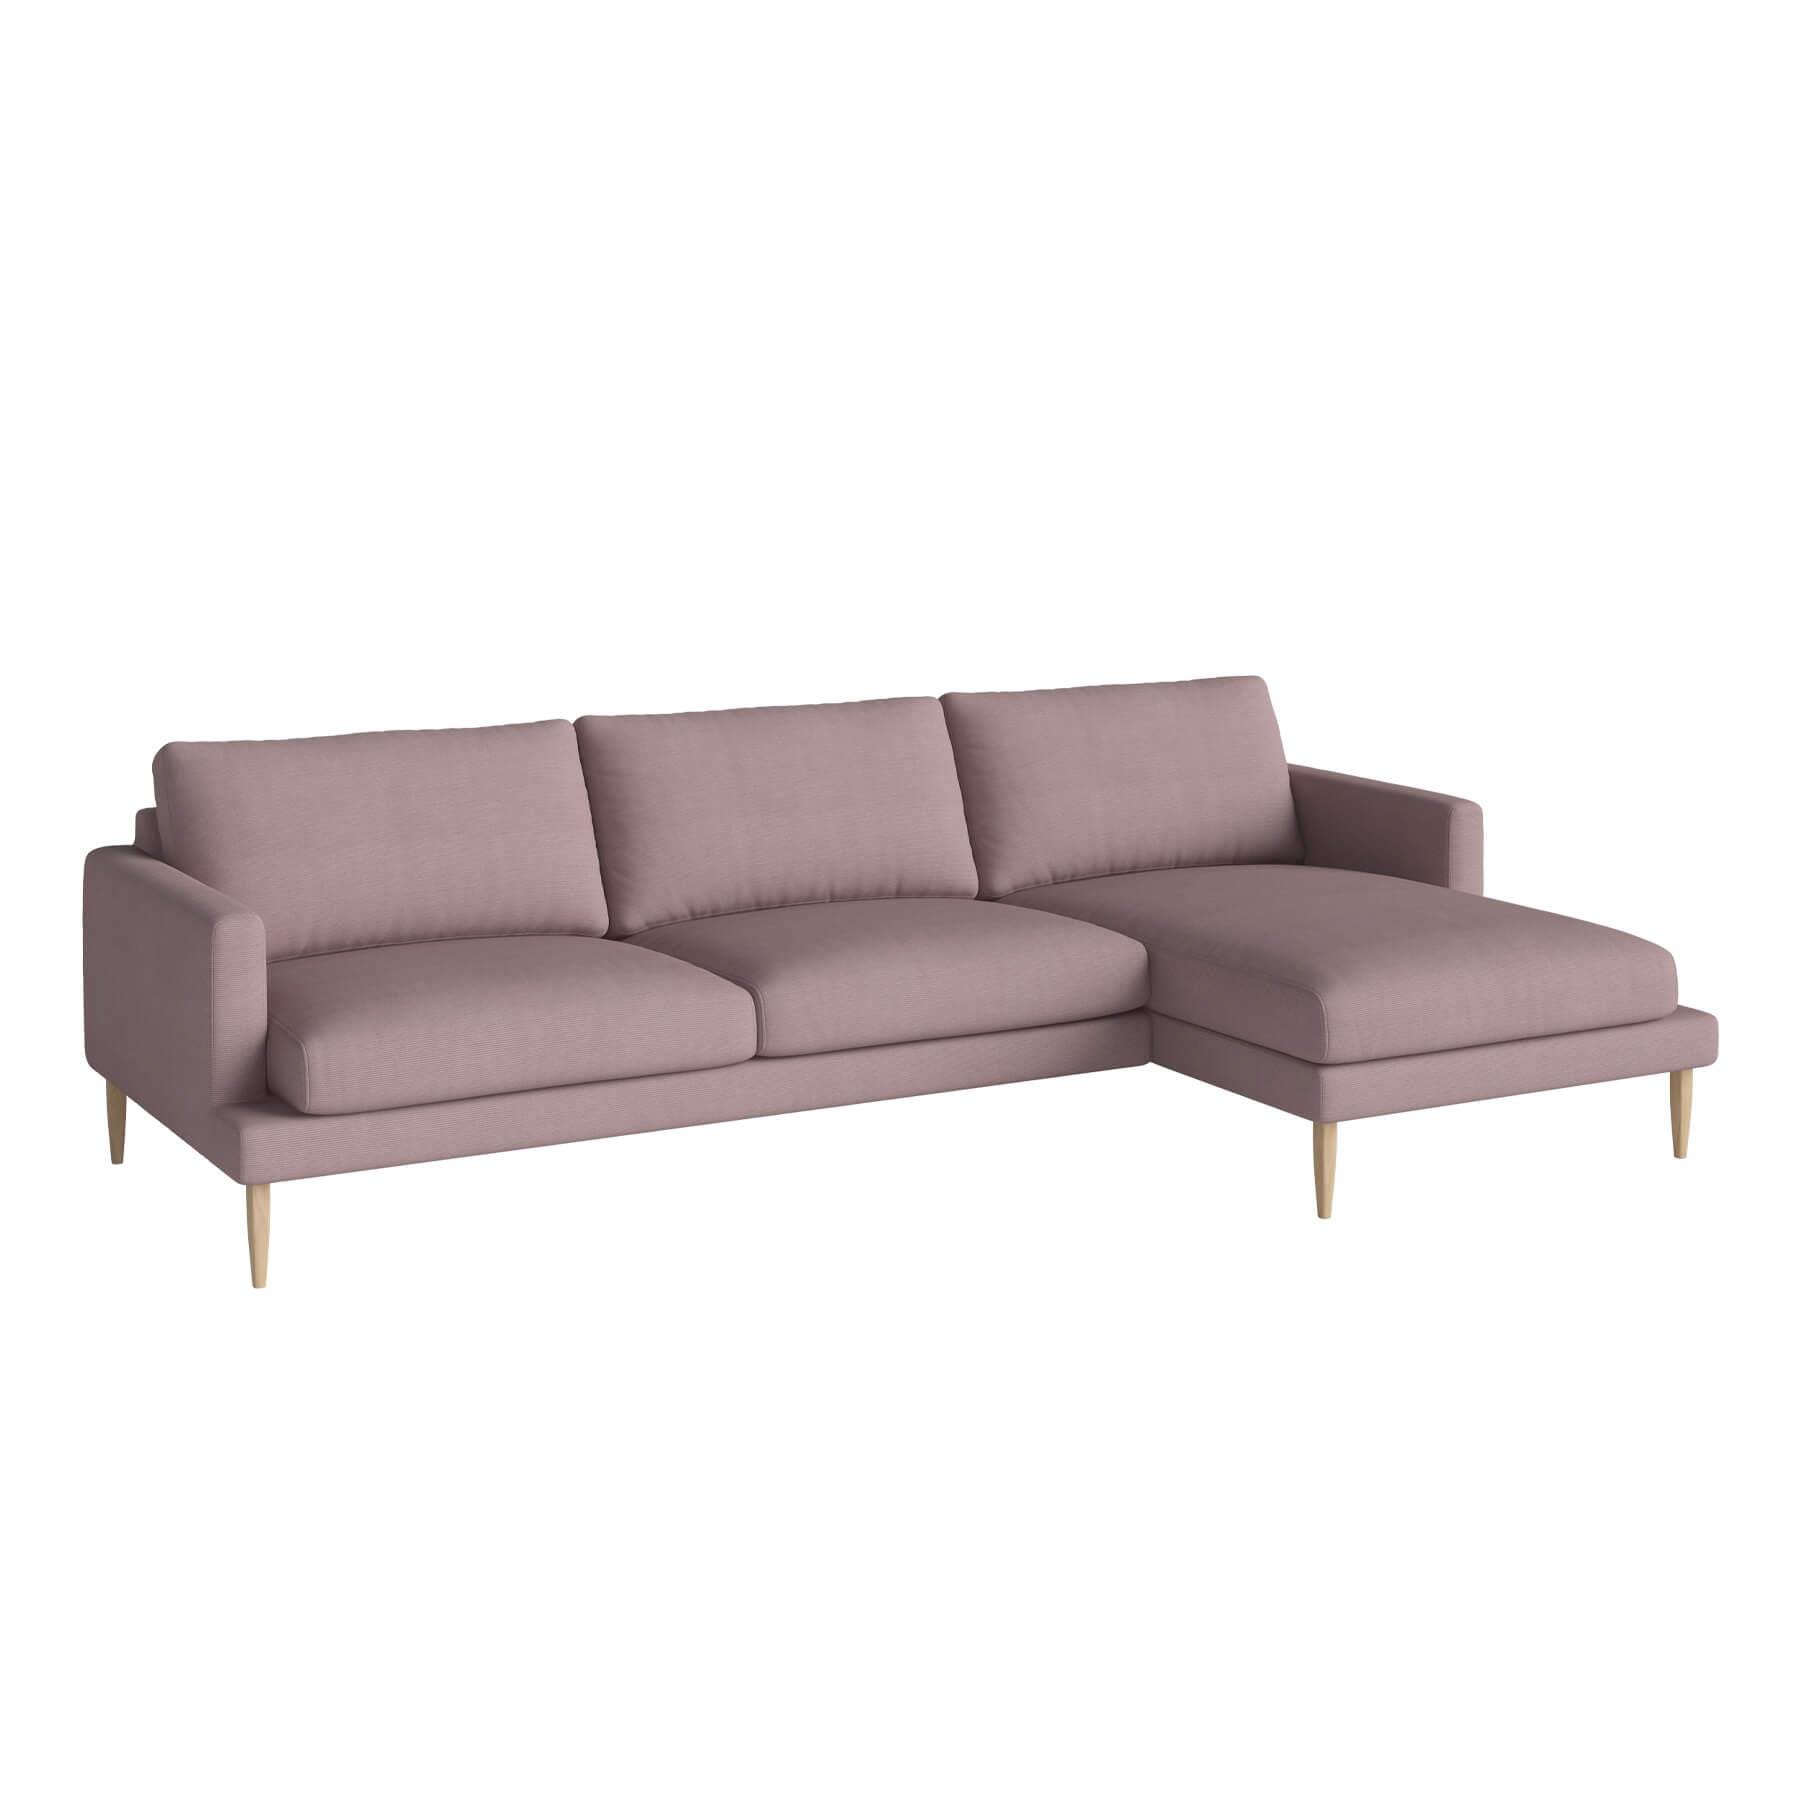 Bolia Veneda Sofa 35 Seater Sofa With Chaise Longue White Oiled Oak Linea Rosa Right Pink Designer Furniture From Holloways Of Ludlow